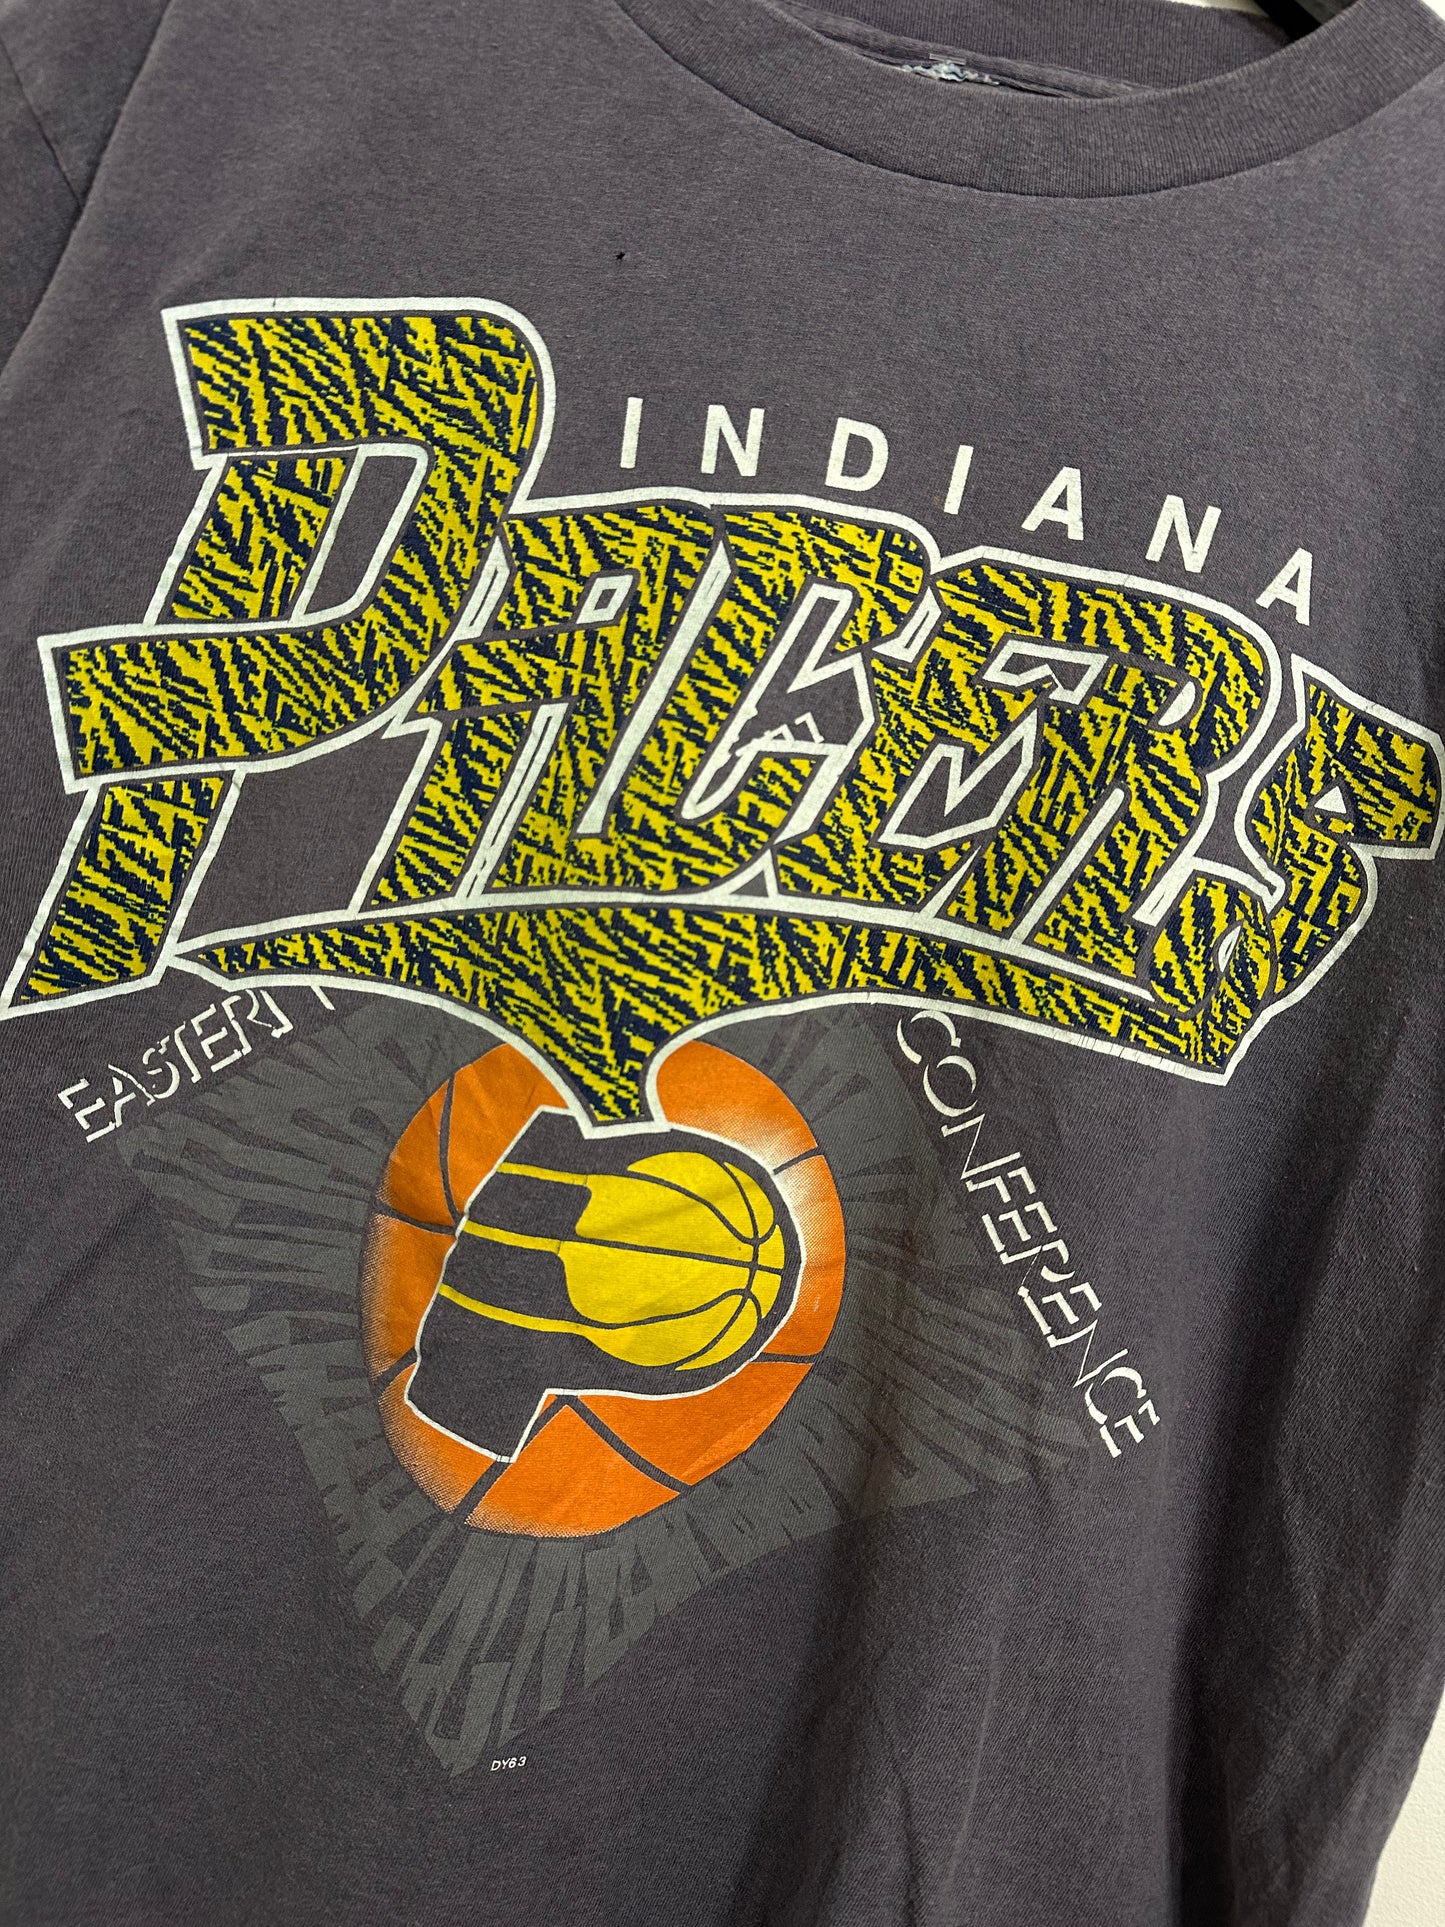 90s Indiana Pacers T-shirt